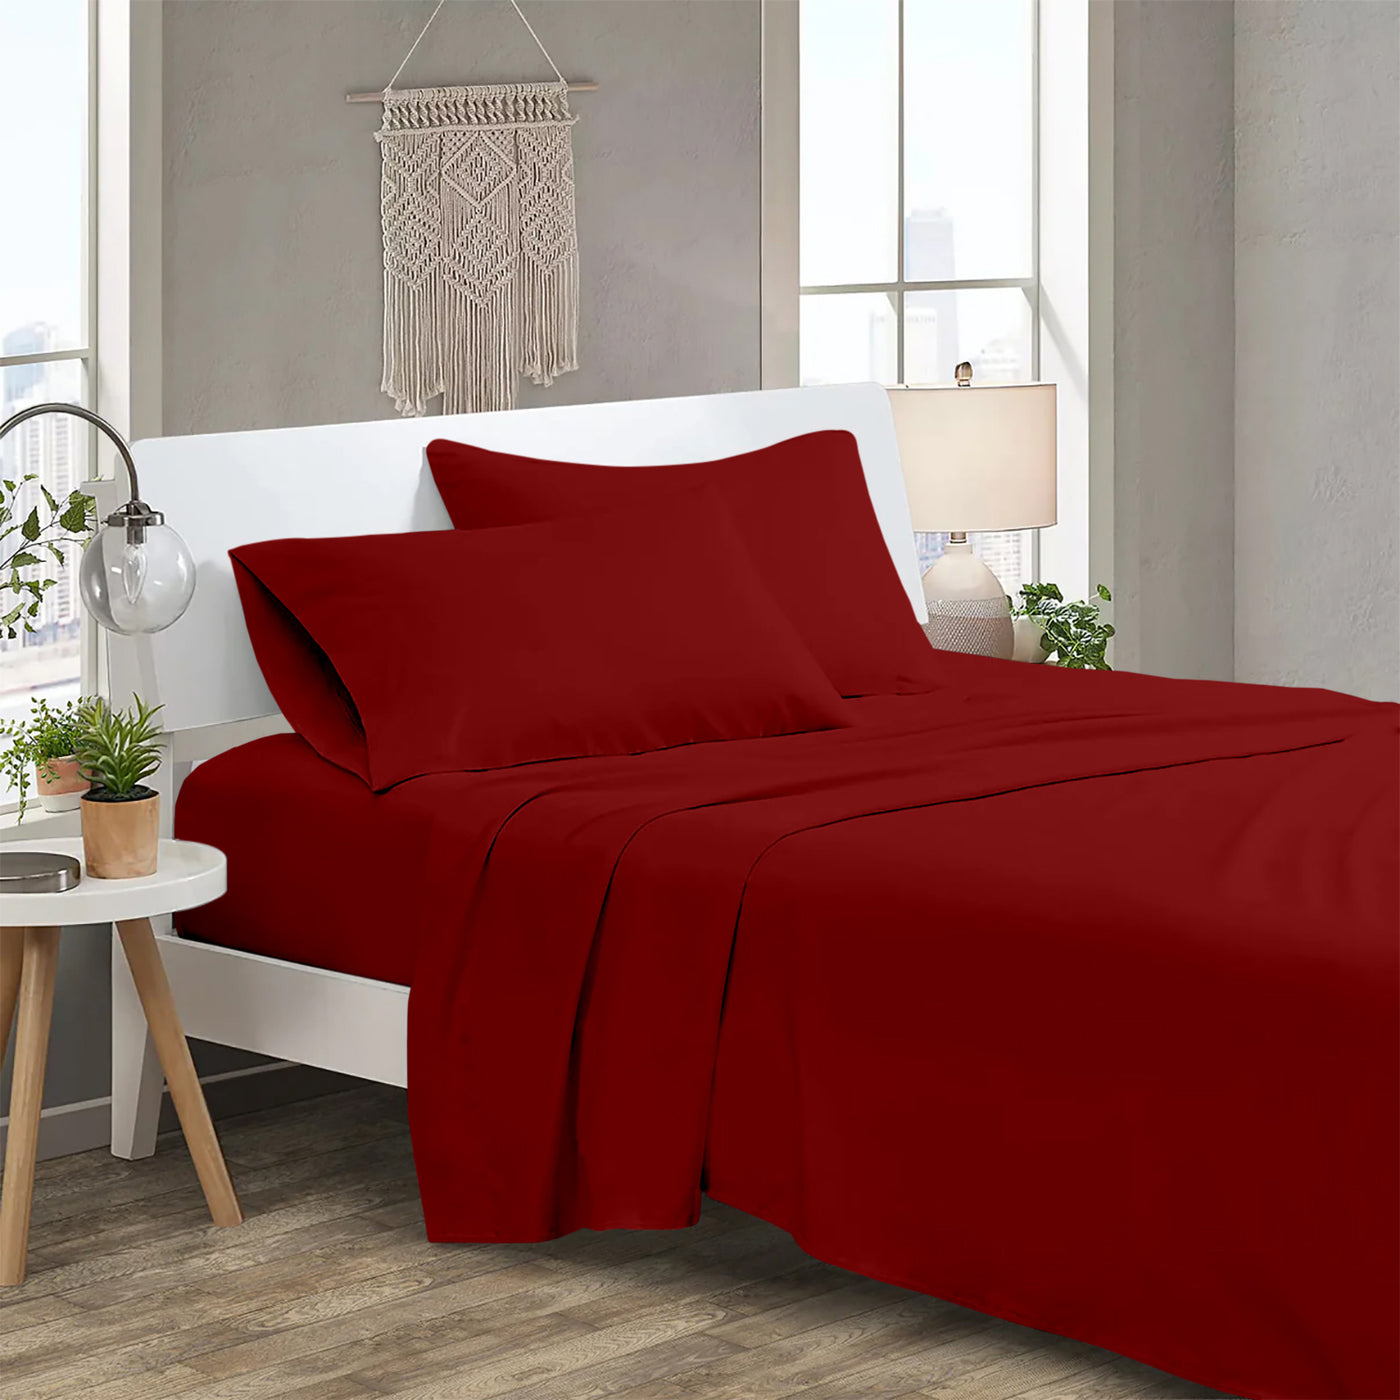 300 TC Egyptian Cotton 3 Piece Solid Flat Bed Sheet - Blood Red